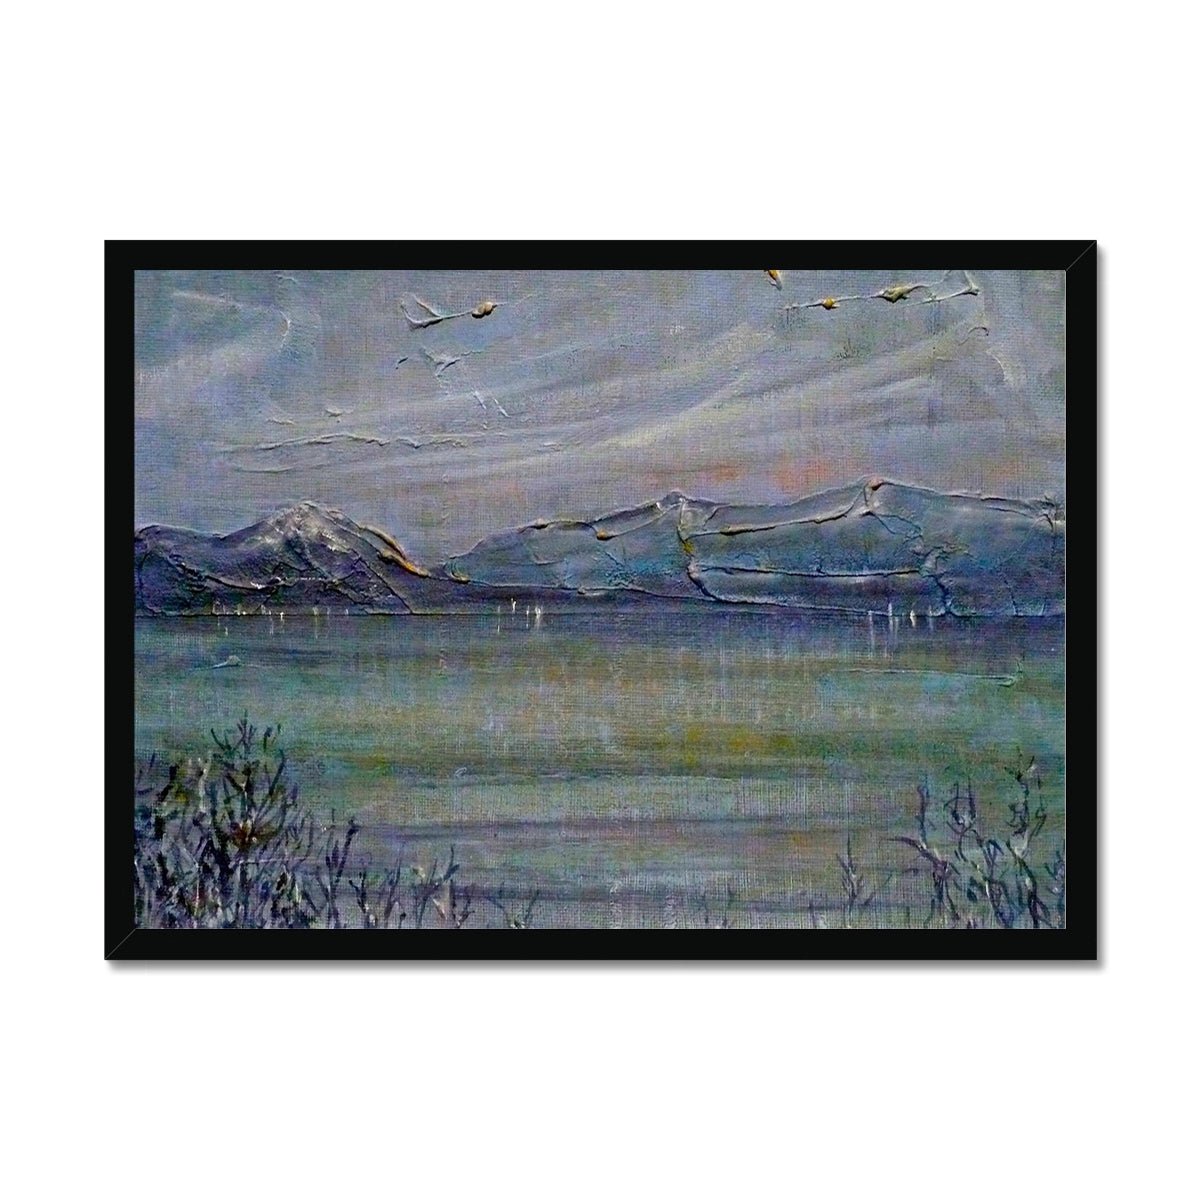 Loch Morlich Moonlight Painting | Framed Prints From Scotland-Framed Prints-Scottish Lochs & Mountains Art Gallery-A2 Landscape-Black Frame-Paintings, Prints, Homeware, Art Gifts From Scotland By Scottish Artist Kevin Hunter